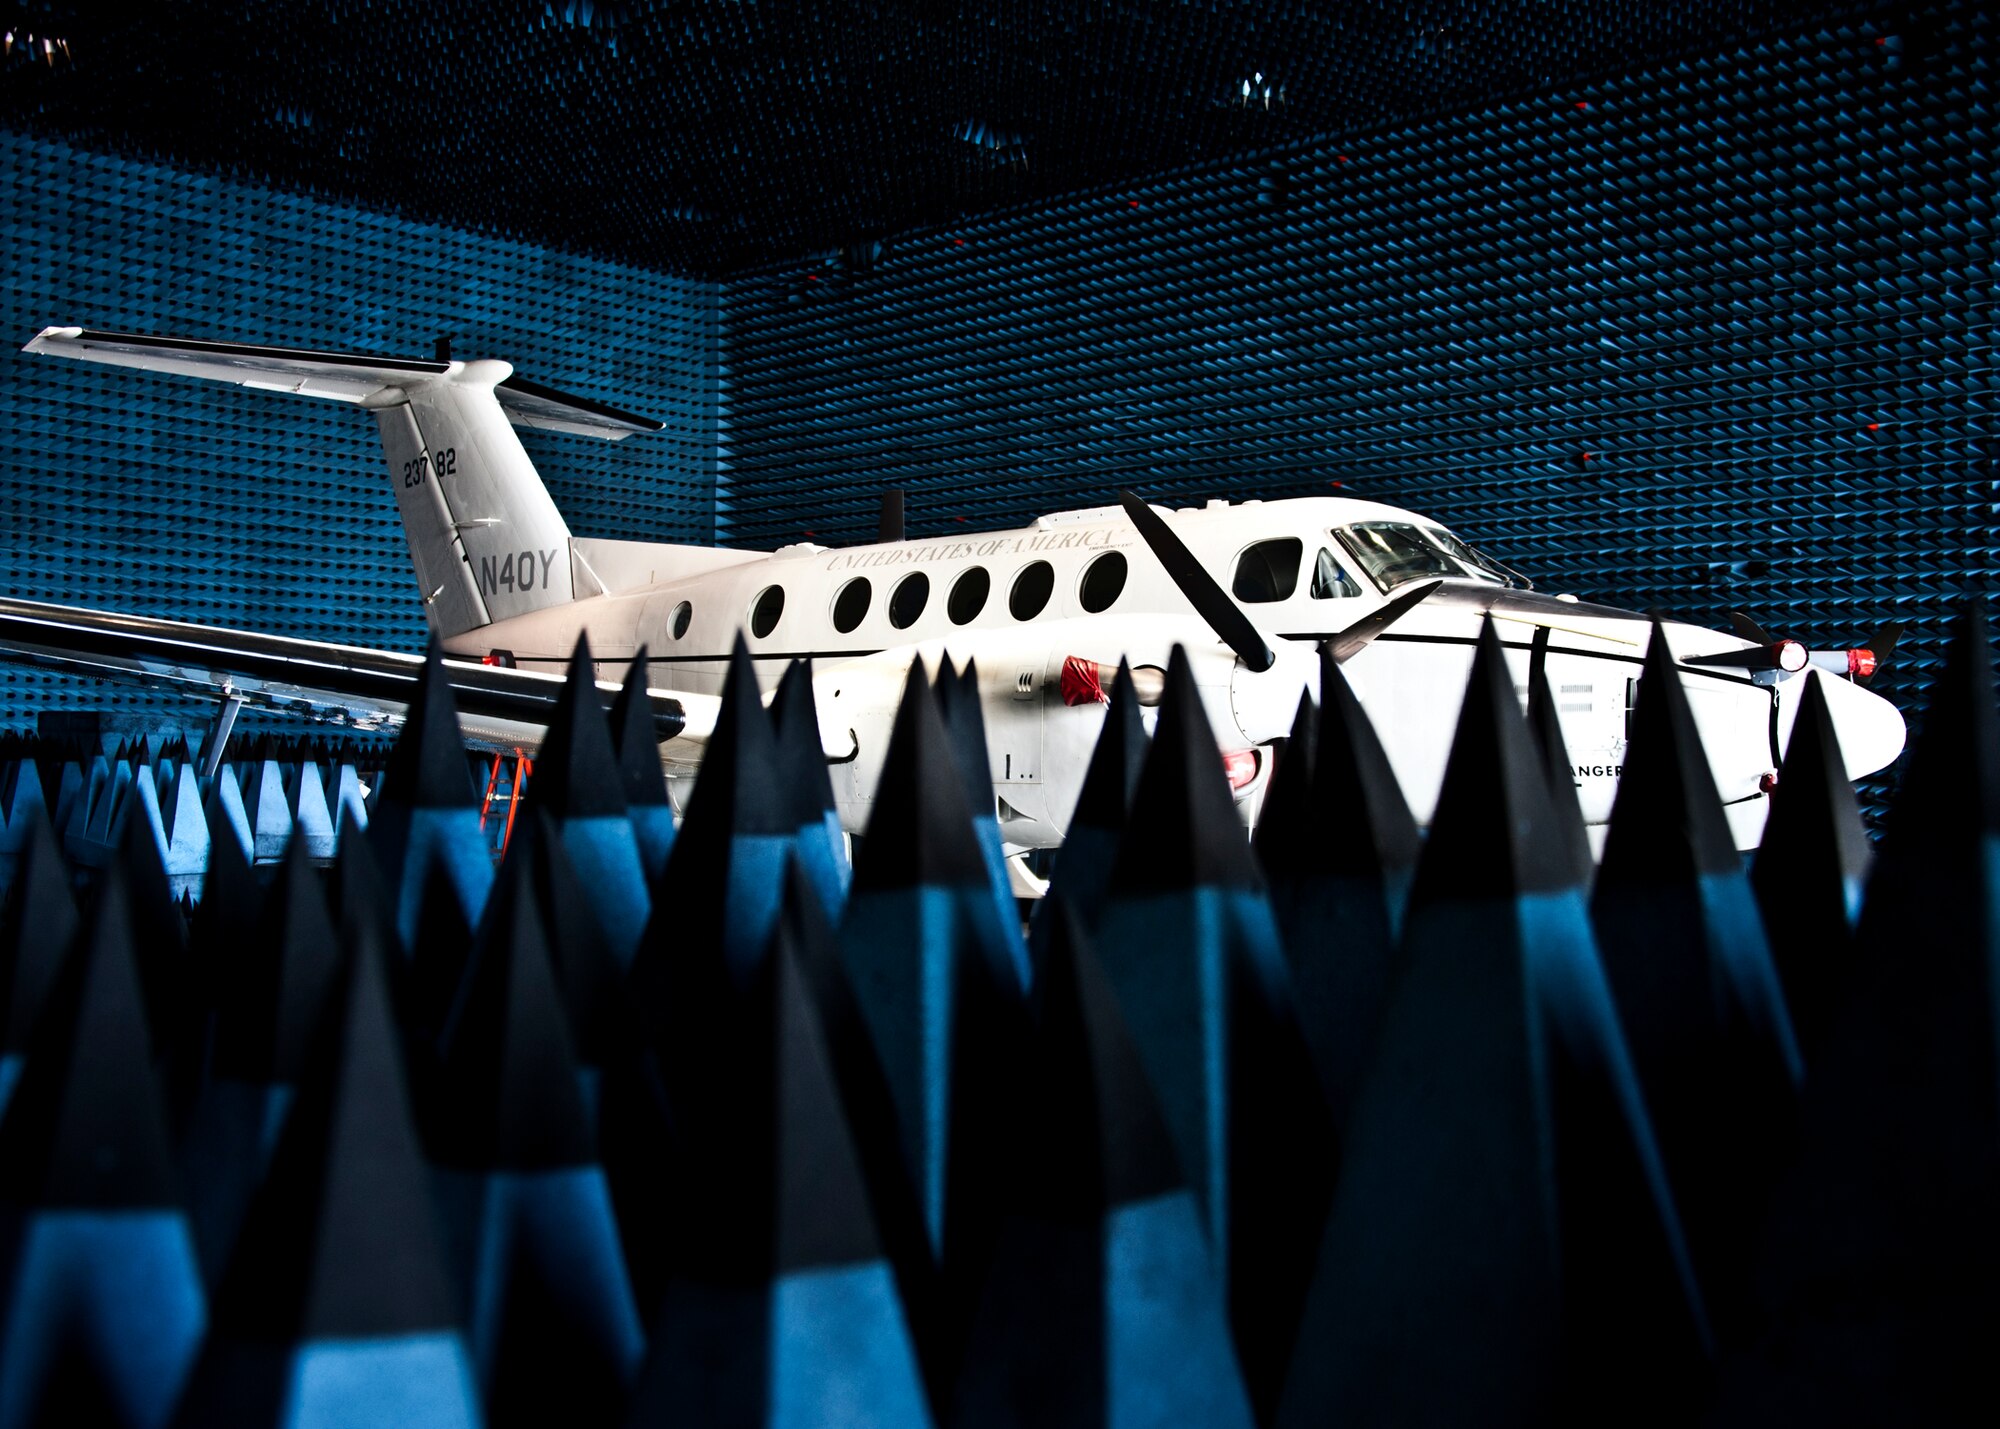 A C-12 Huron sits in the anechoic chamber at Eglin Air Force Base.  The aircraft was part of a joint retrofitting test mission among the Army, Navy and Air Force to test their electronic warfare systems.  The Army provided the aircraft that housed the Navy's electronic countermeasure systems, which was tested by the Air Force.  An anechoic chamber is a room designed to stop reflections of either sound or electromagnetic waves. They are also insulated from exterior sources of noise.  The  The Joint Preflight Integration of Munitions and Electronic Systems, a subsidiary of the 46th Test Wing, has hosted similar joint test missions for more than five years in the chamber. JPRIMES provides an environment to facilitate testing air-to-air and air-to-surface munitions and electronics systems on full-scale aircraft and land vehicles prior to open air testing.  (U.S. Air Force photo/Samuel King Jr.)